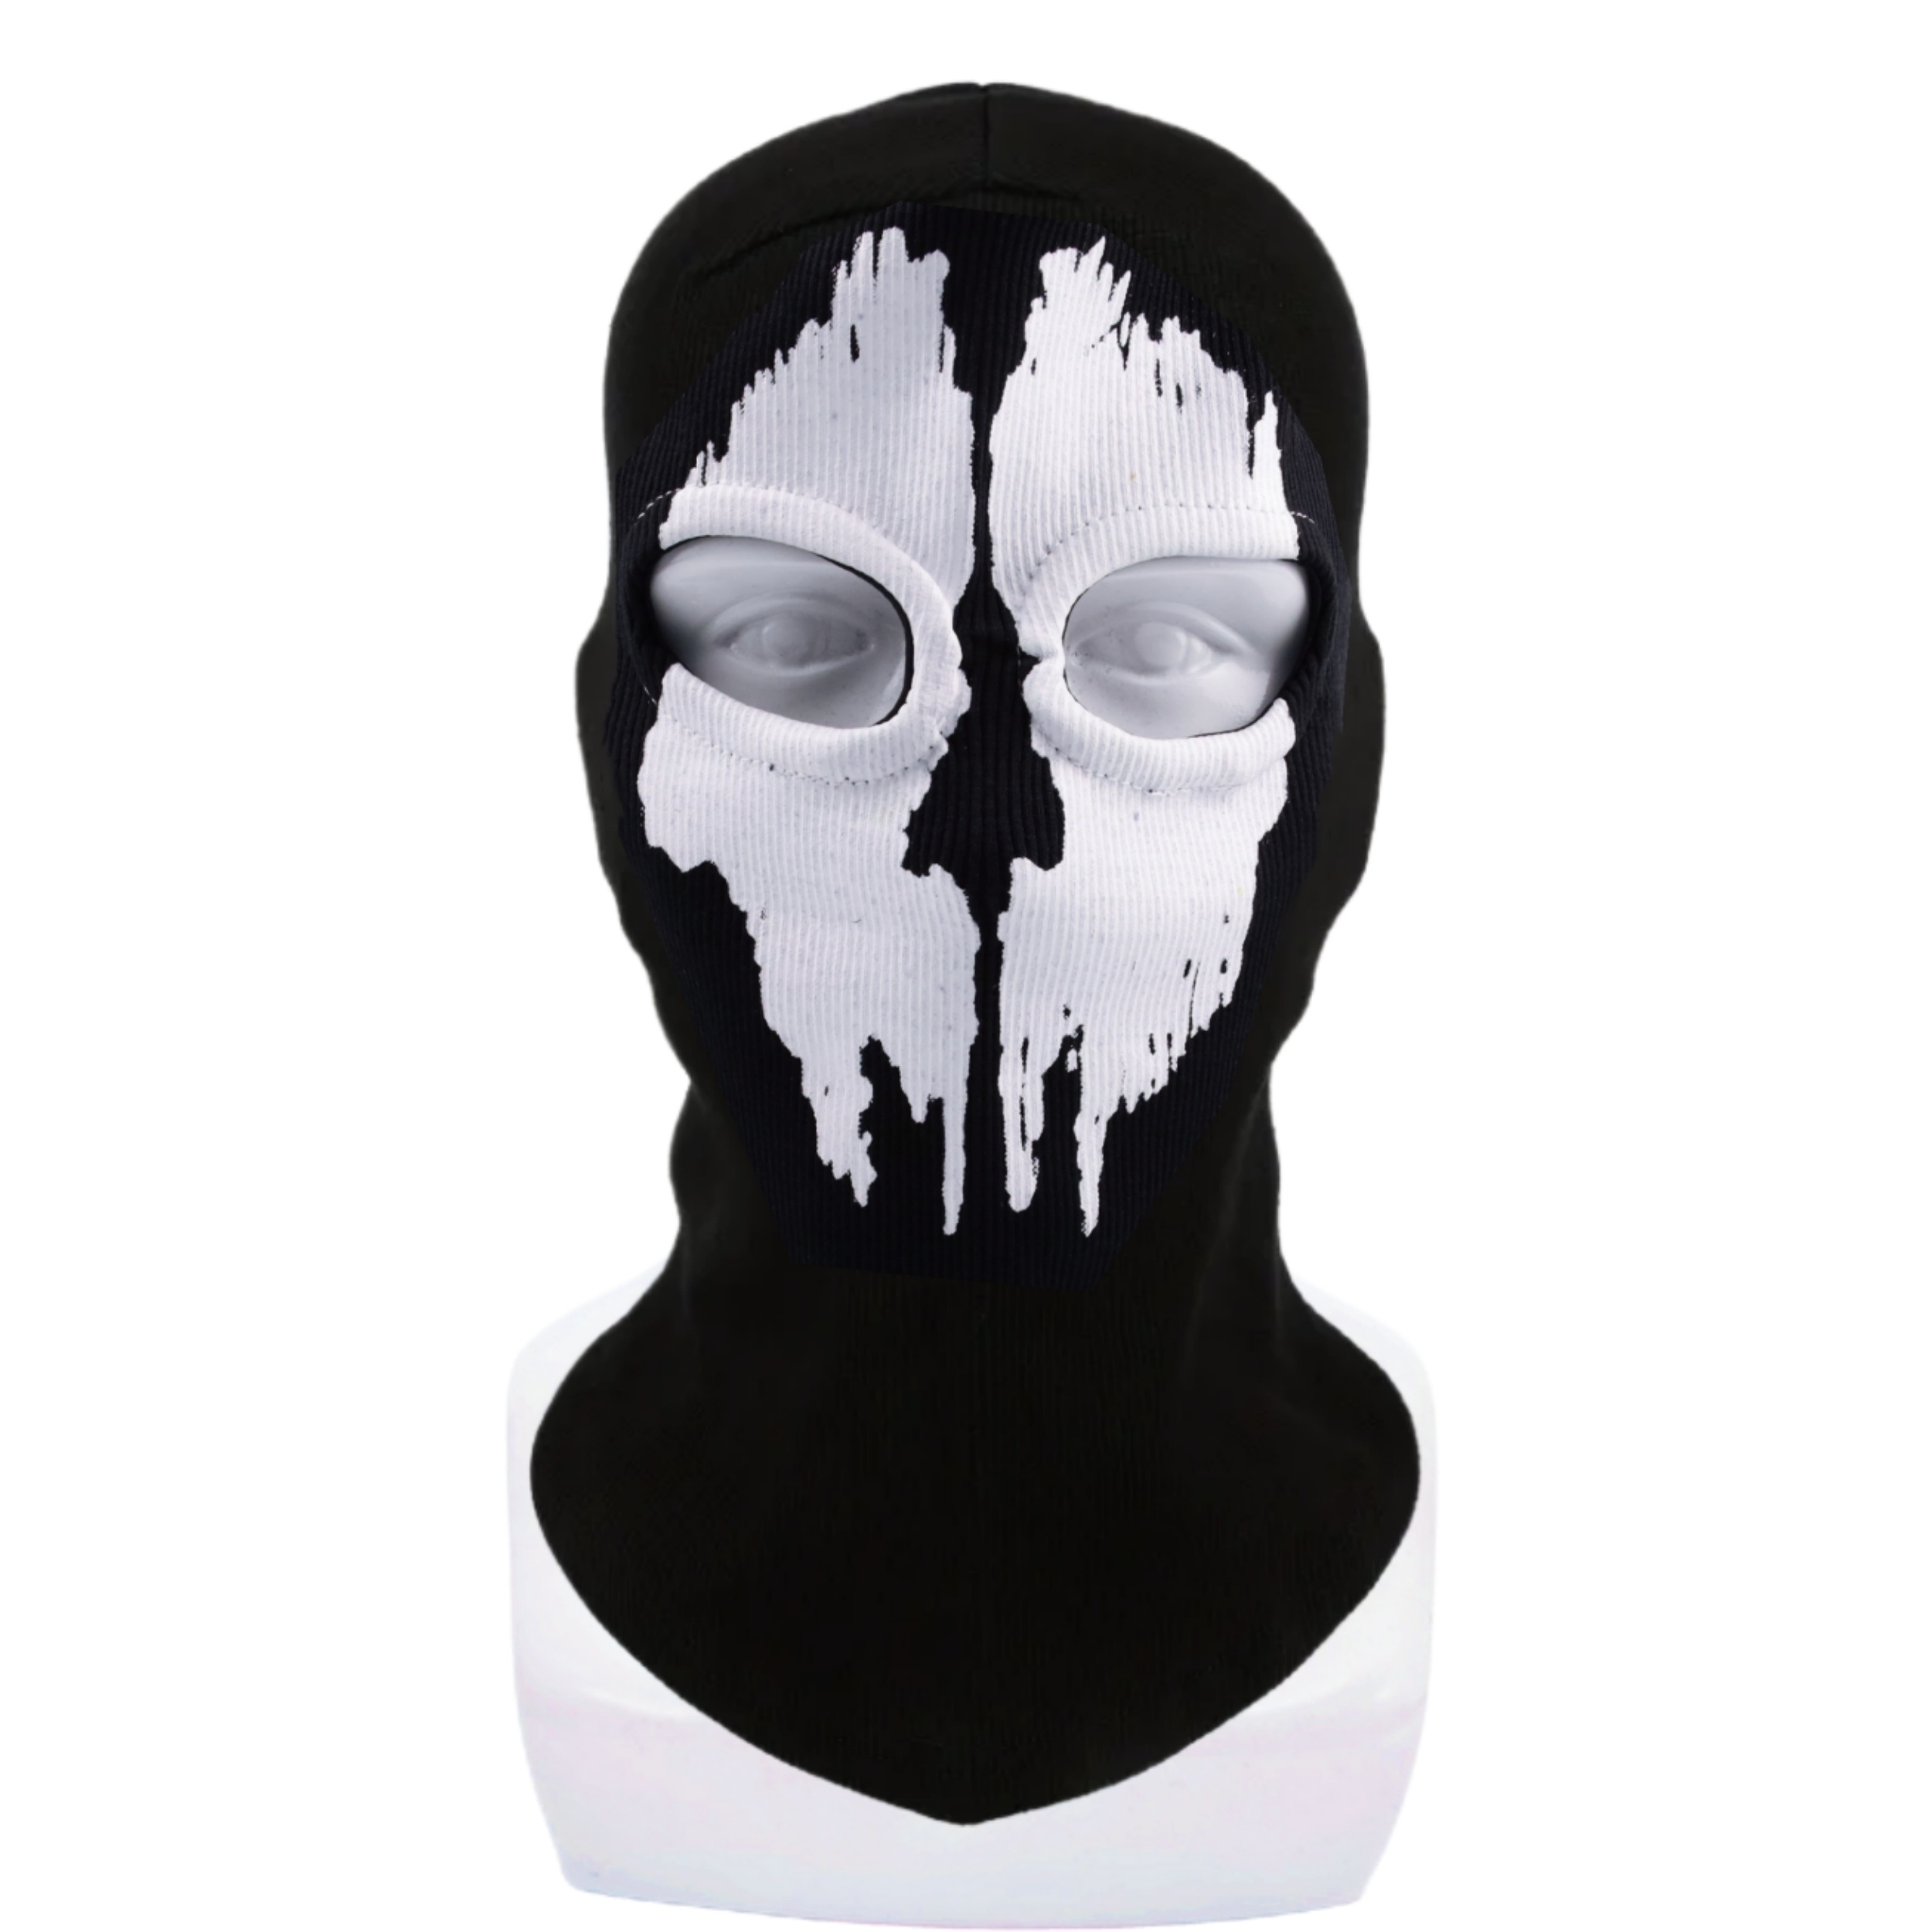 Outdoor Cycling Ski Ghost Skull Mask MX2 Call Of Duty Ghost Mask